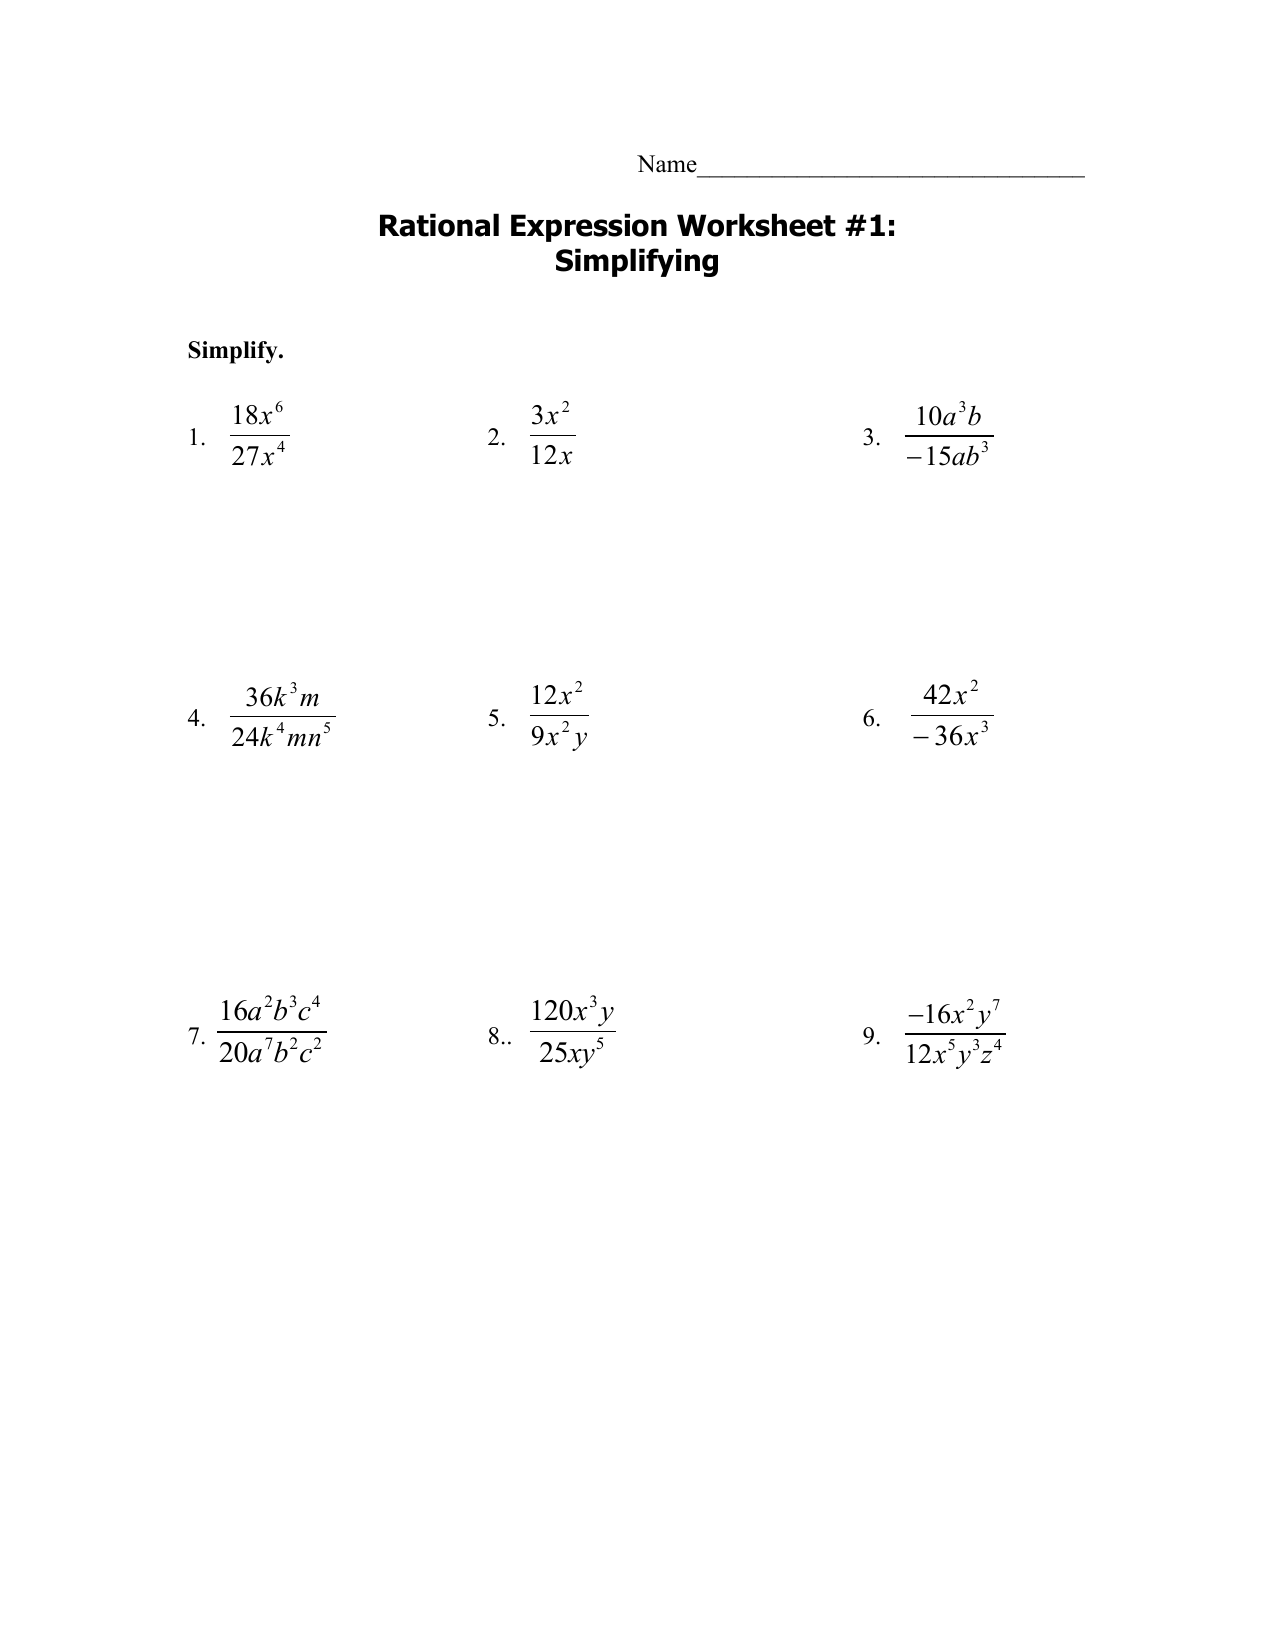 M11111111 rationalworksheets1111-111111 1111 With Multiplying Rational Expressions Worksheet